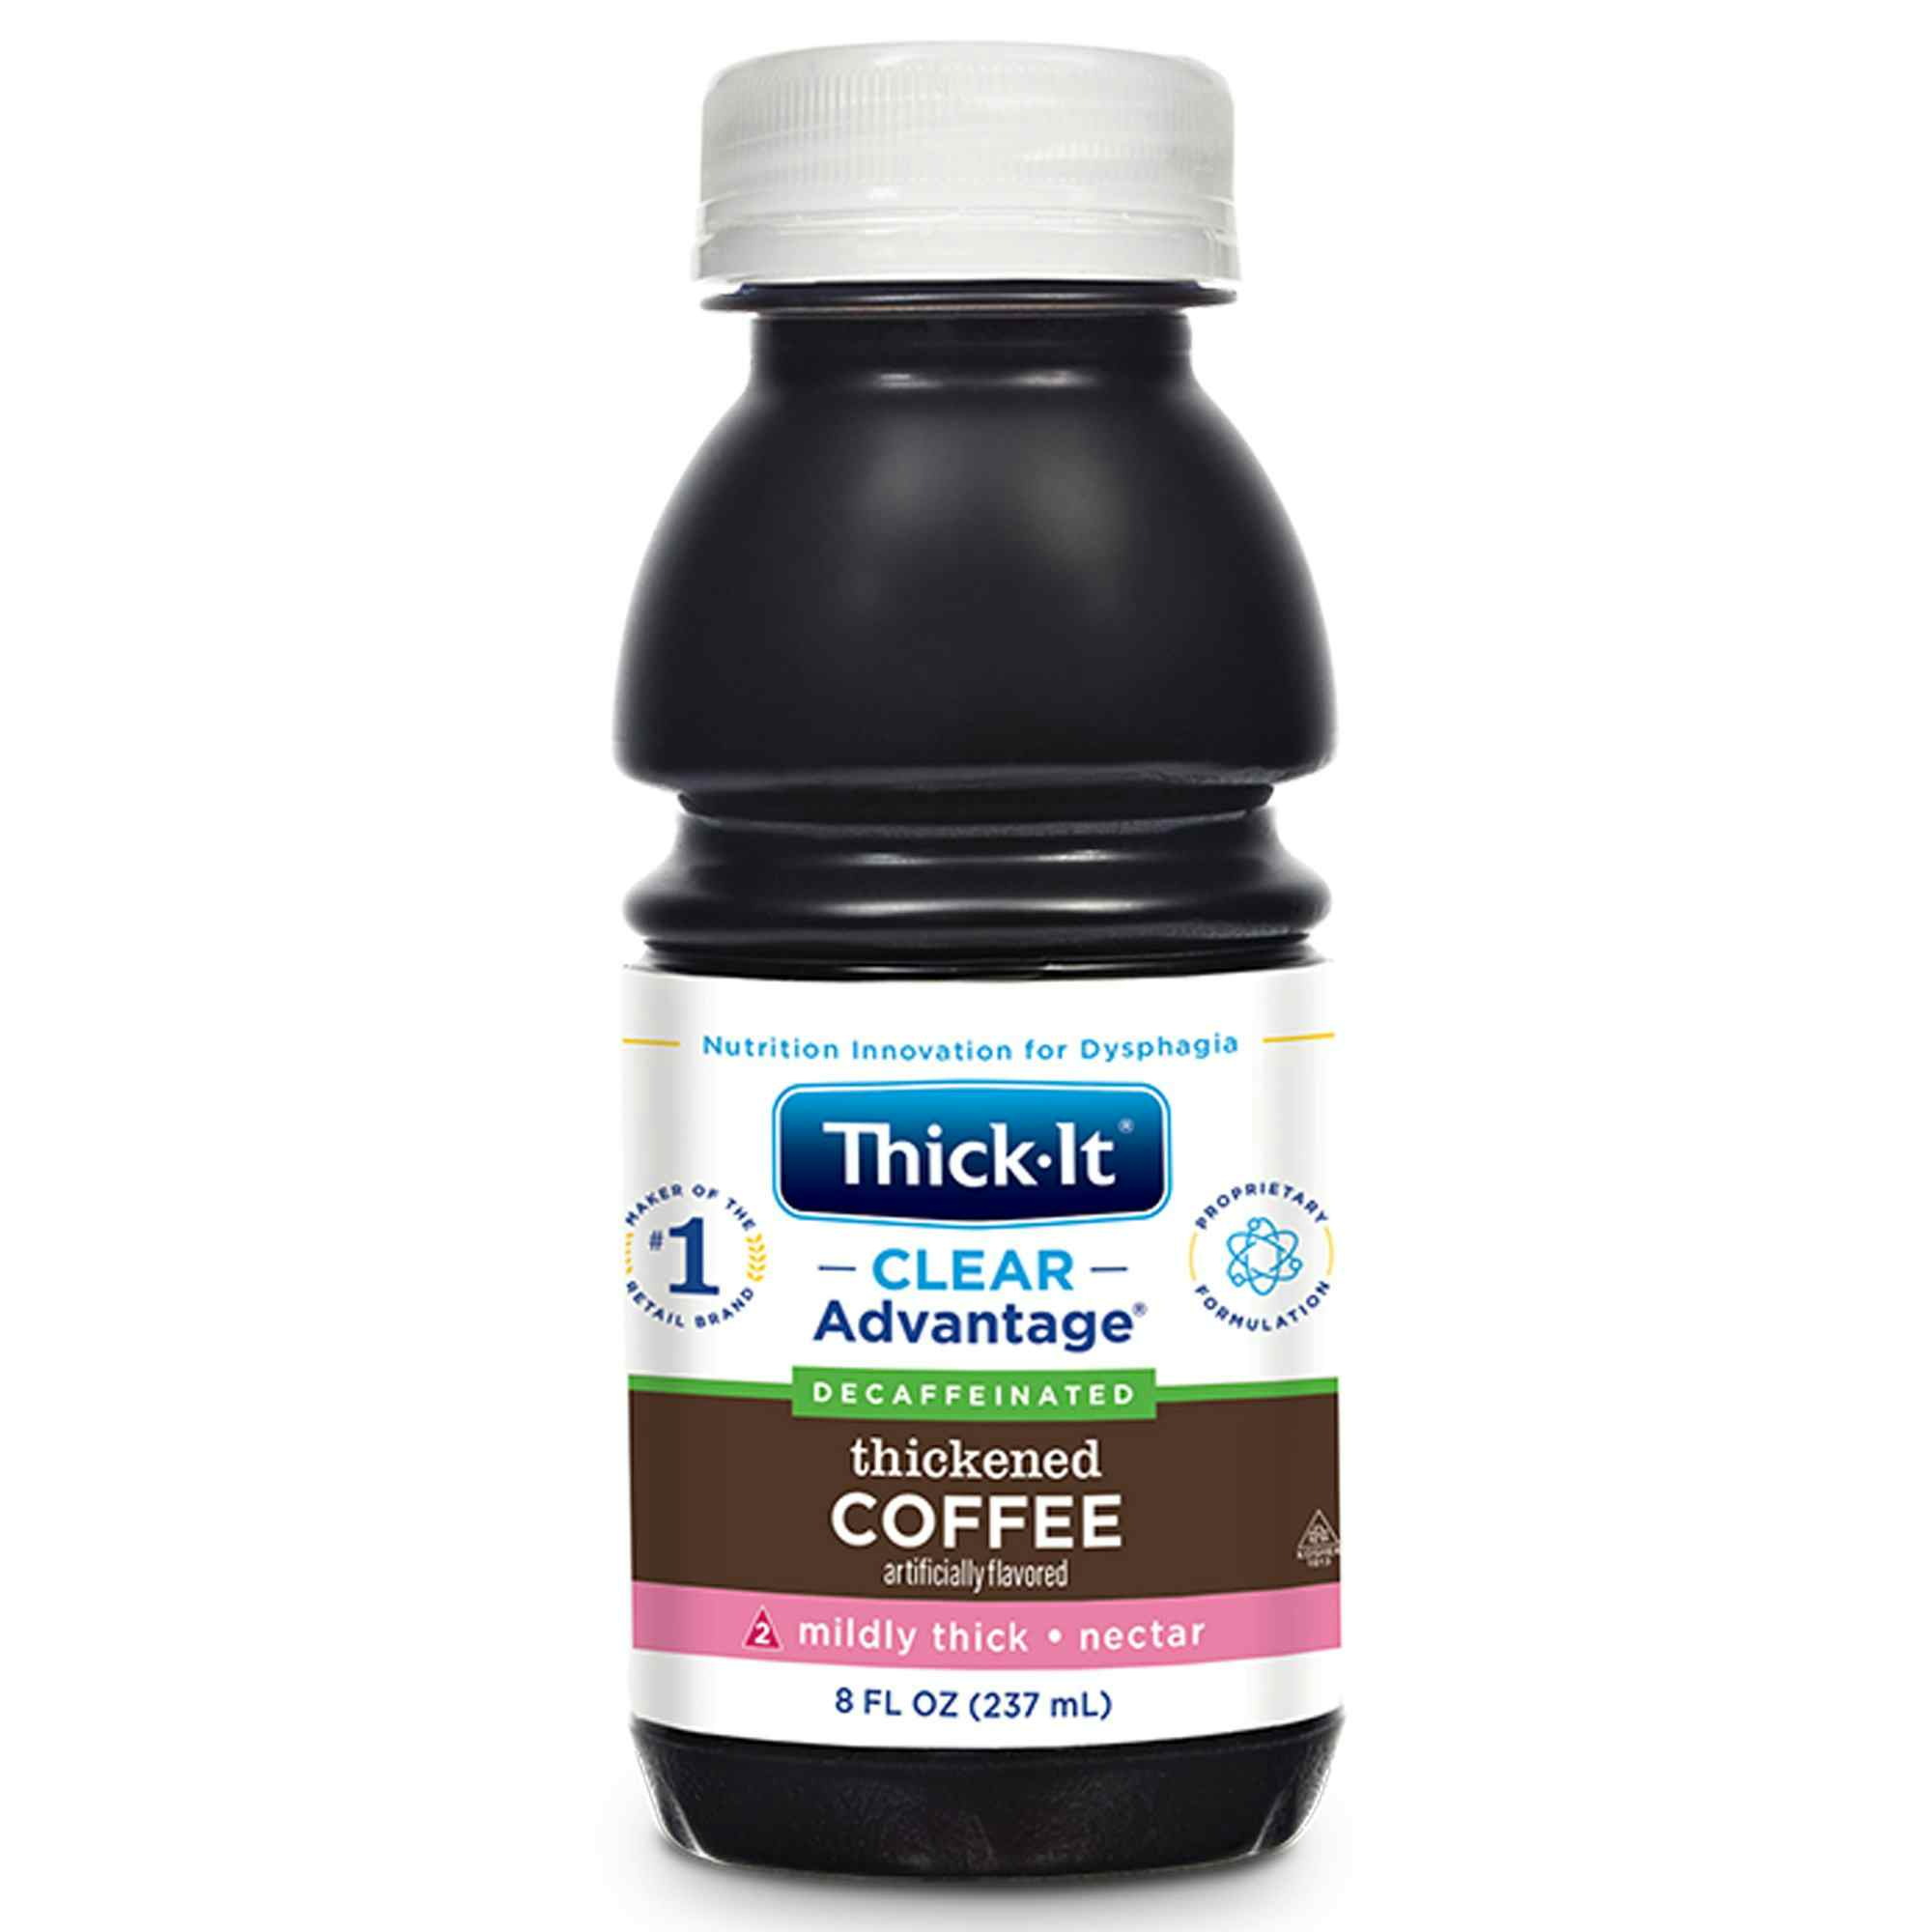 Thick-It Clear Advantage Decaffeinated Thickened Coffee, Mildly Thick, Nectar Consistency, B469-L9044, 8 oz. - 1 Each